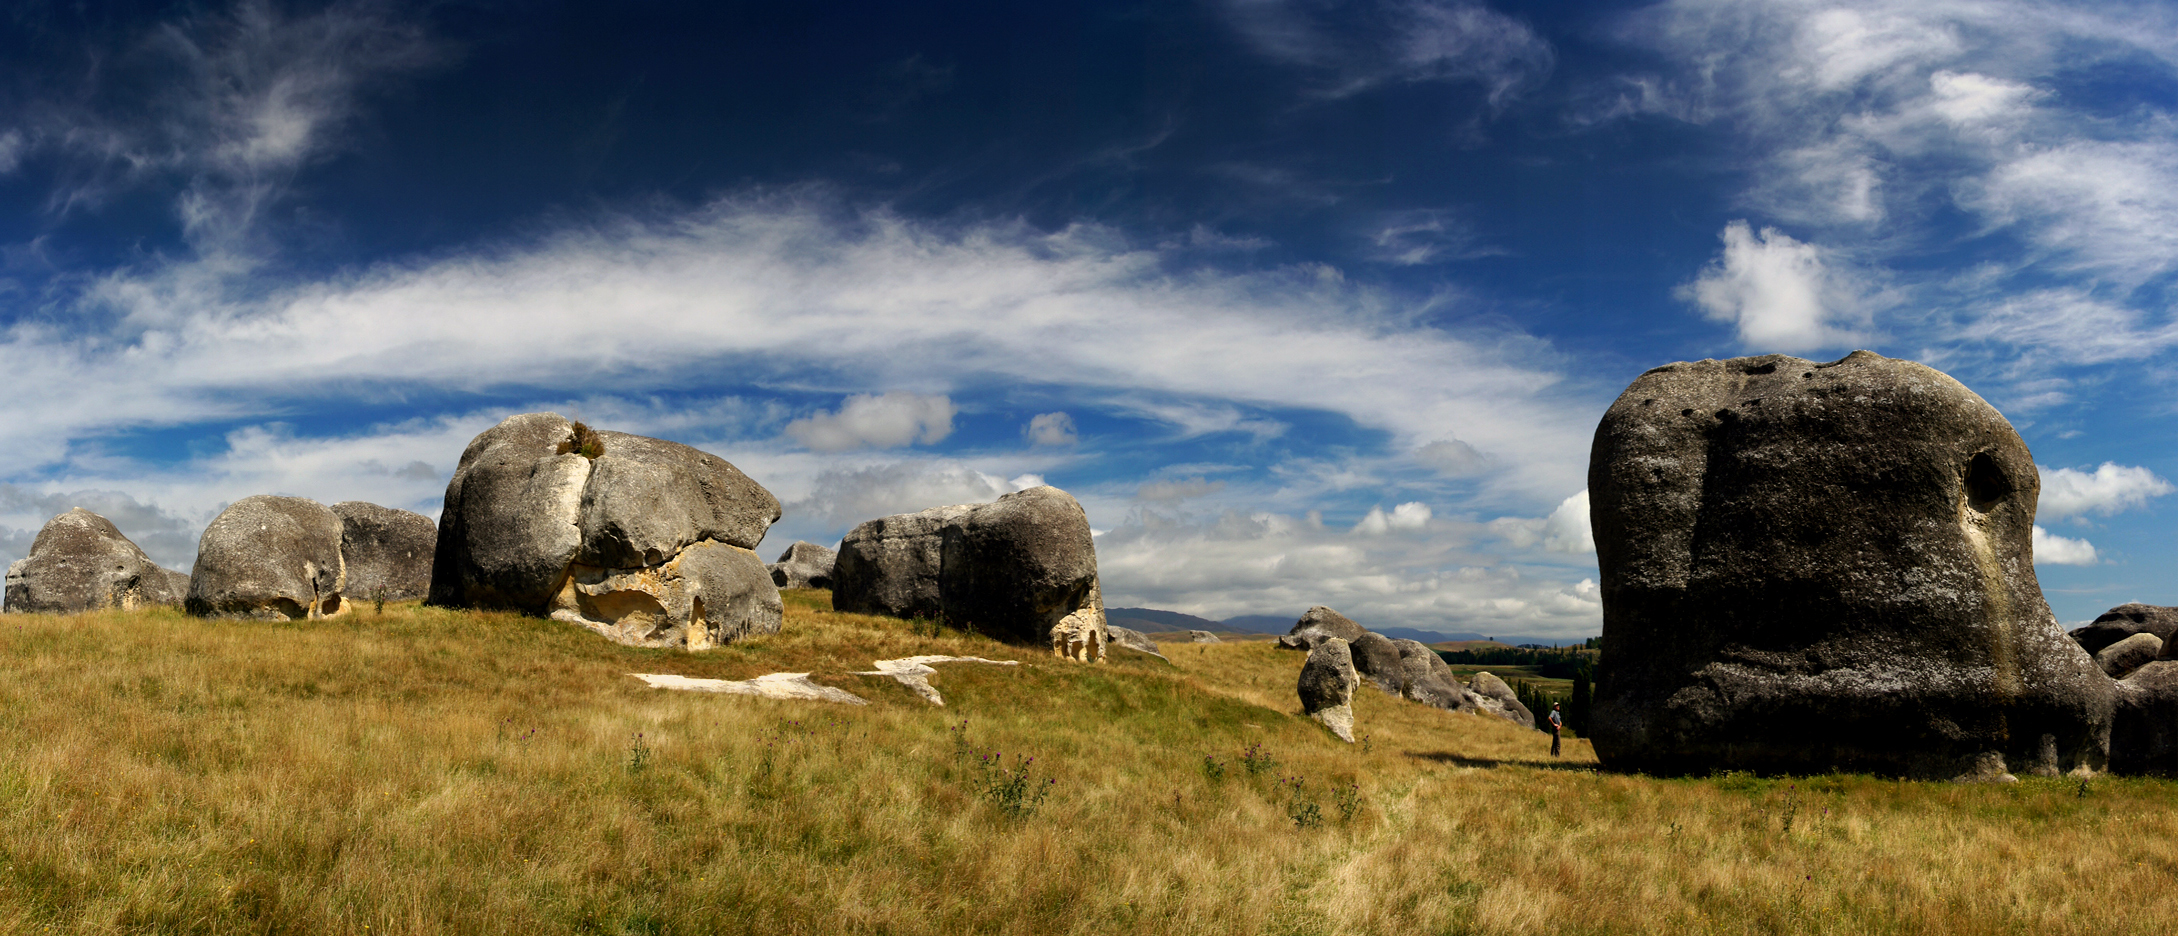 Elephant Rocks near Duntroon in North Otago are named for an elephant that died there in 1868. Image by Bernard Spragg, CC0 1.0